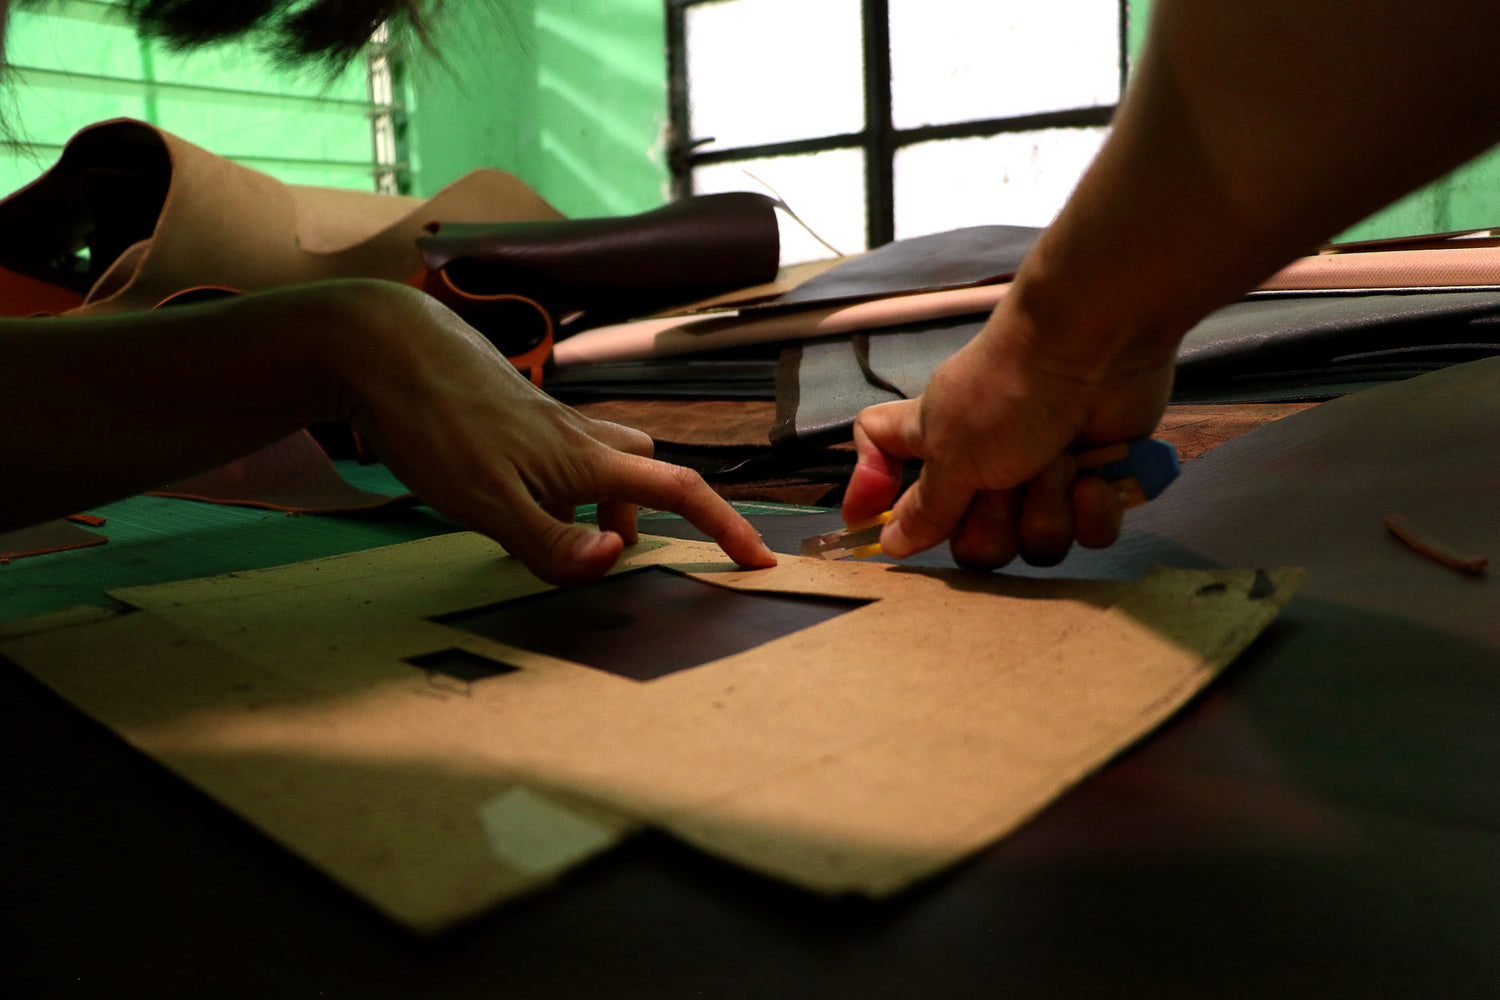 Hand-crafter's measuring and cutting leather for bags, laptop cases, and other goods. 